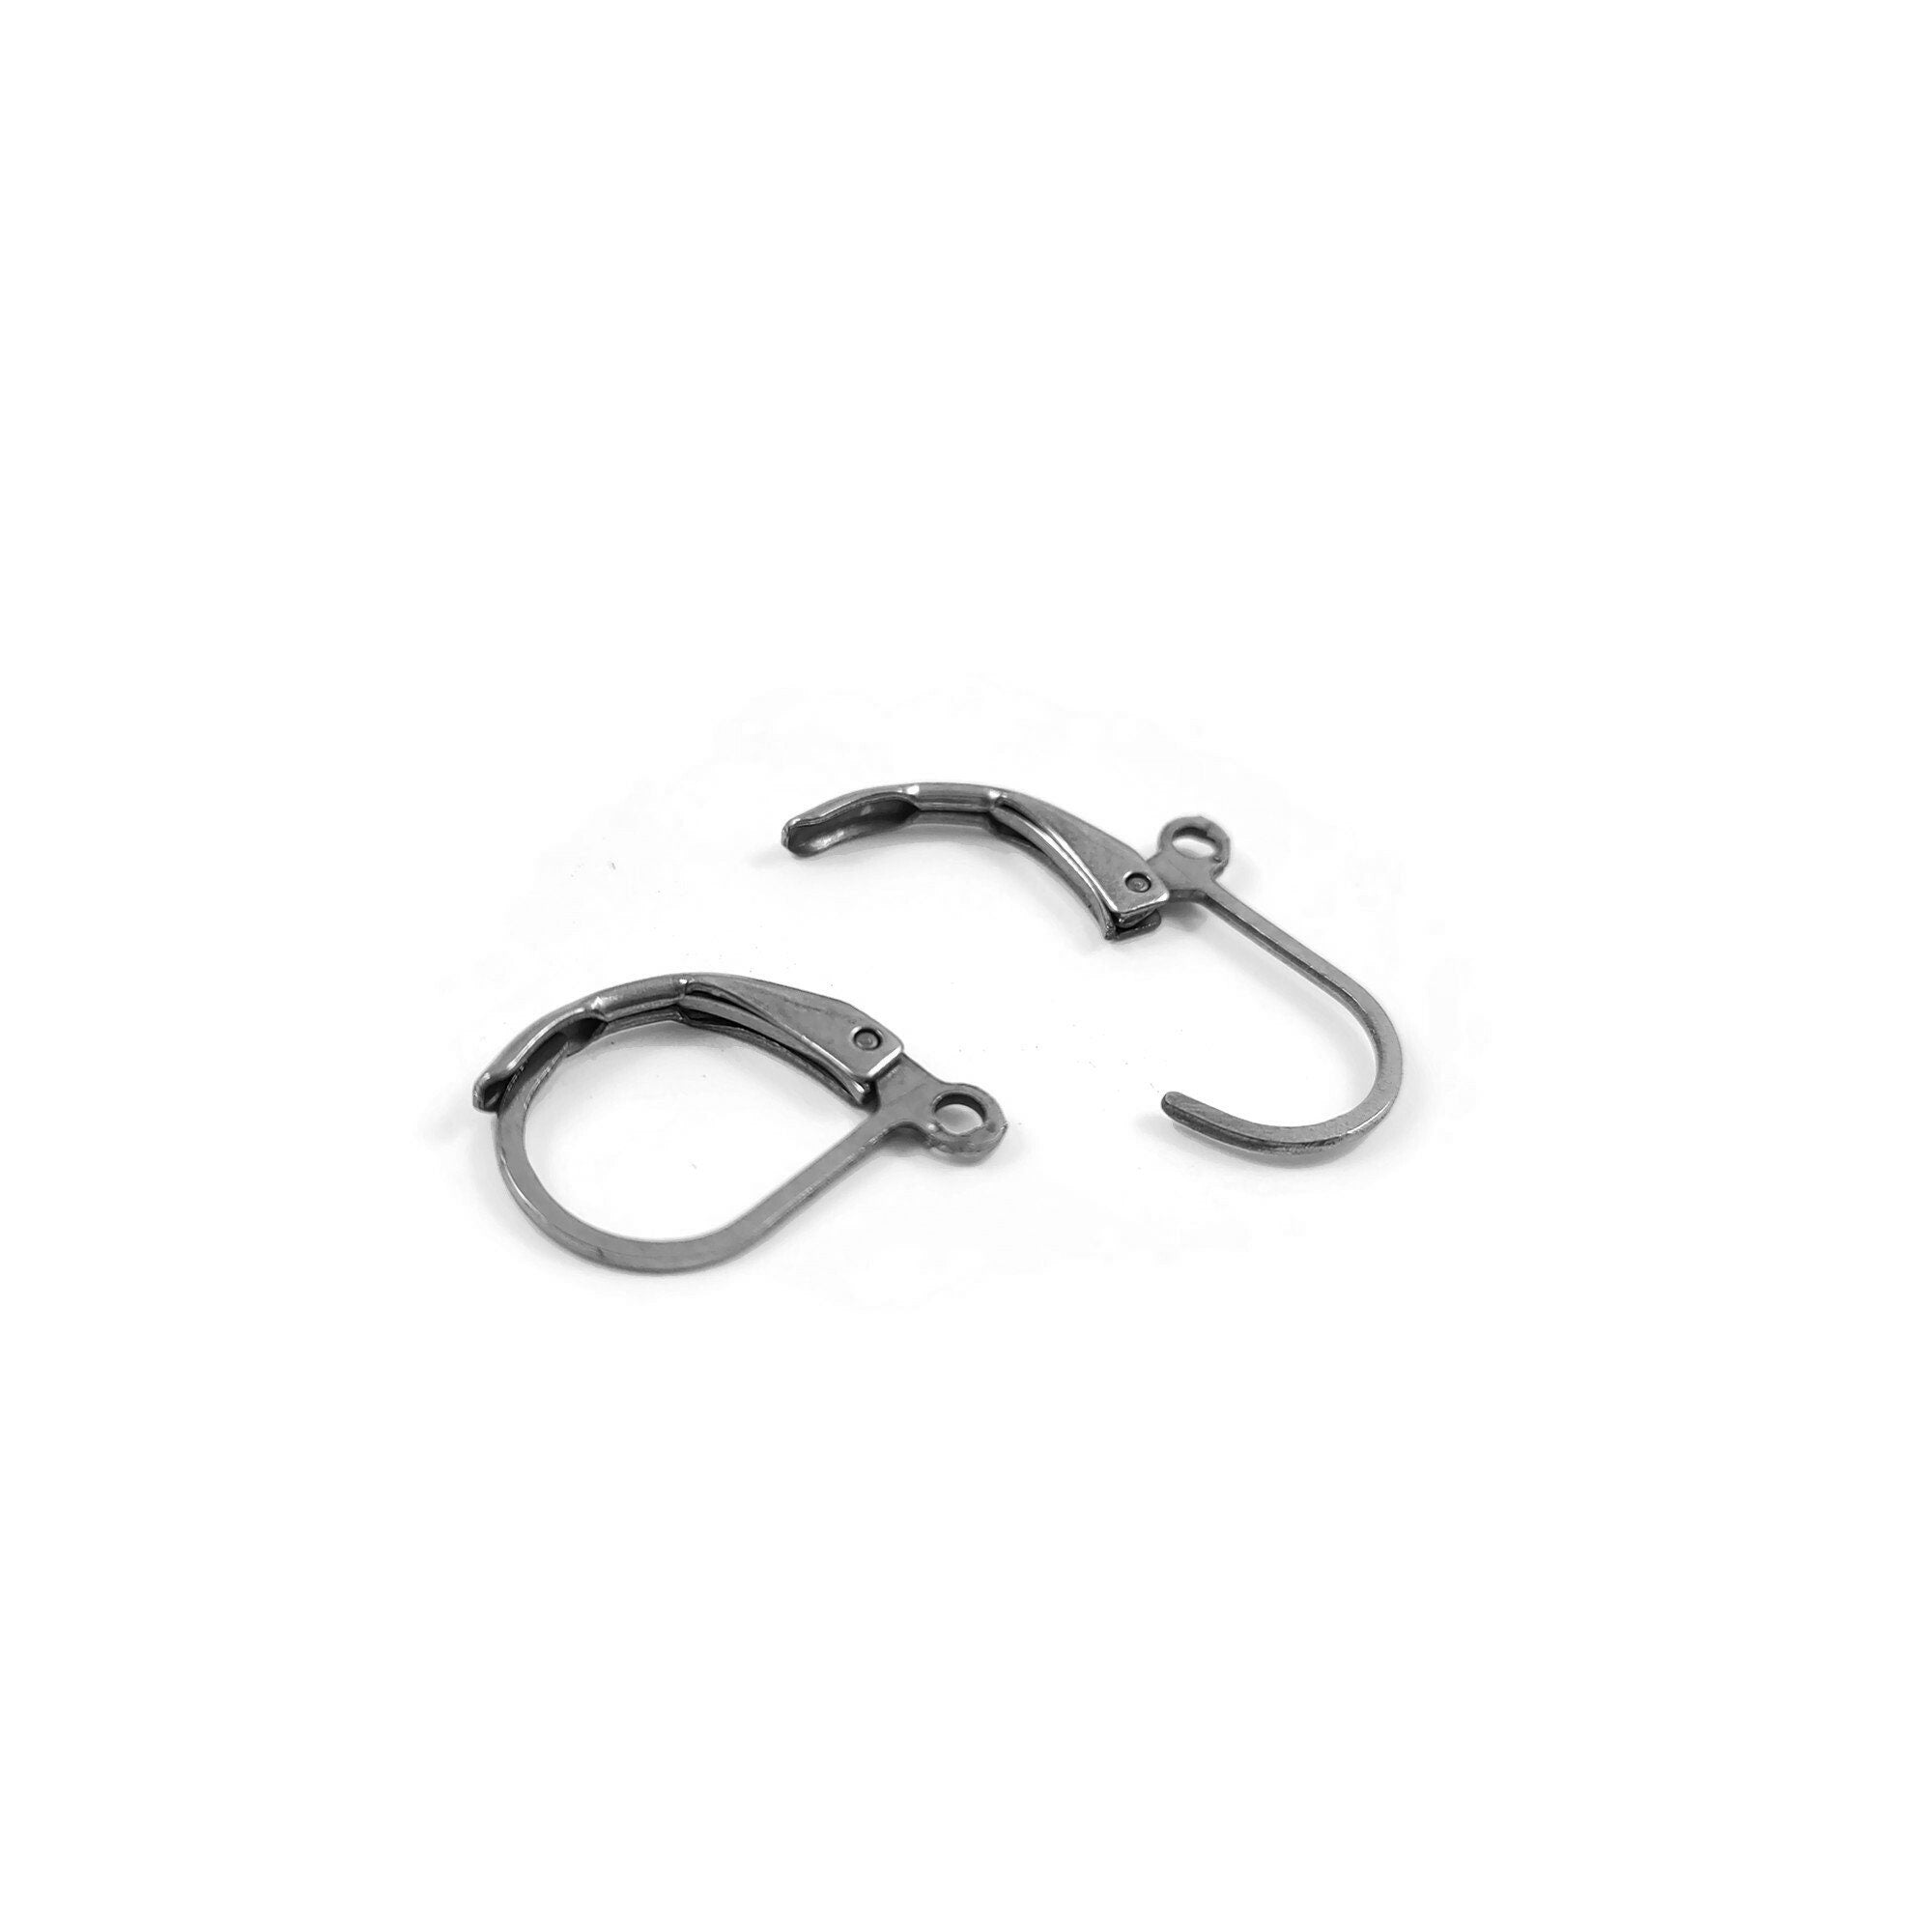 7mm SILVER Surgical Stainless Large Loop 7mm Earring Wires